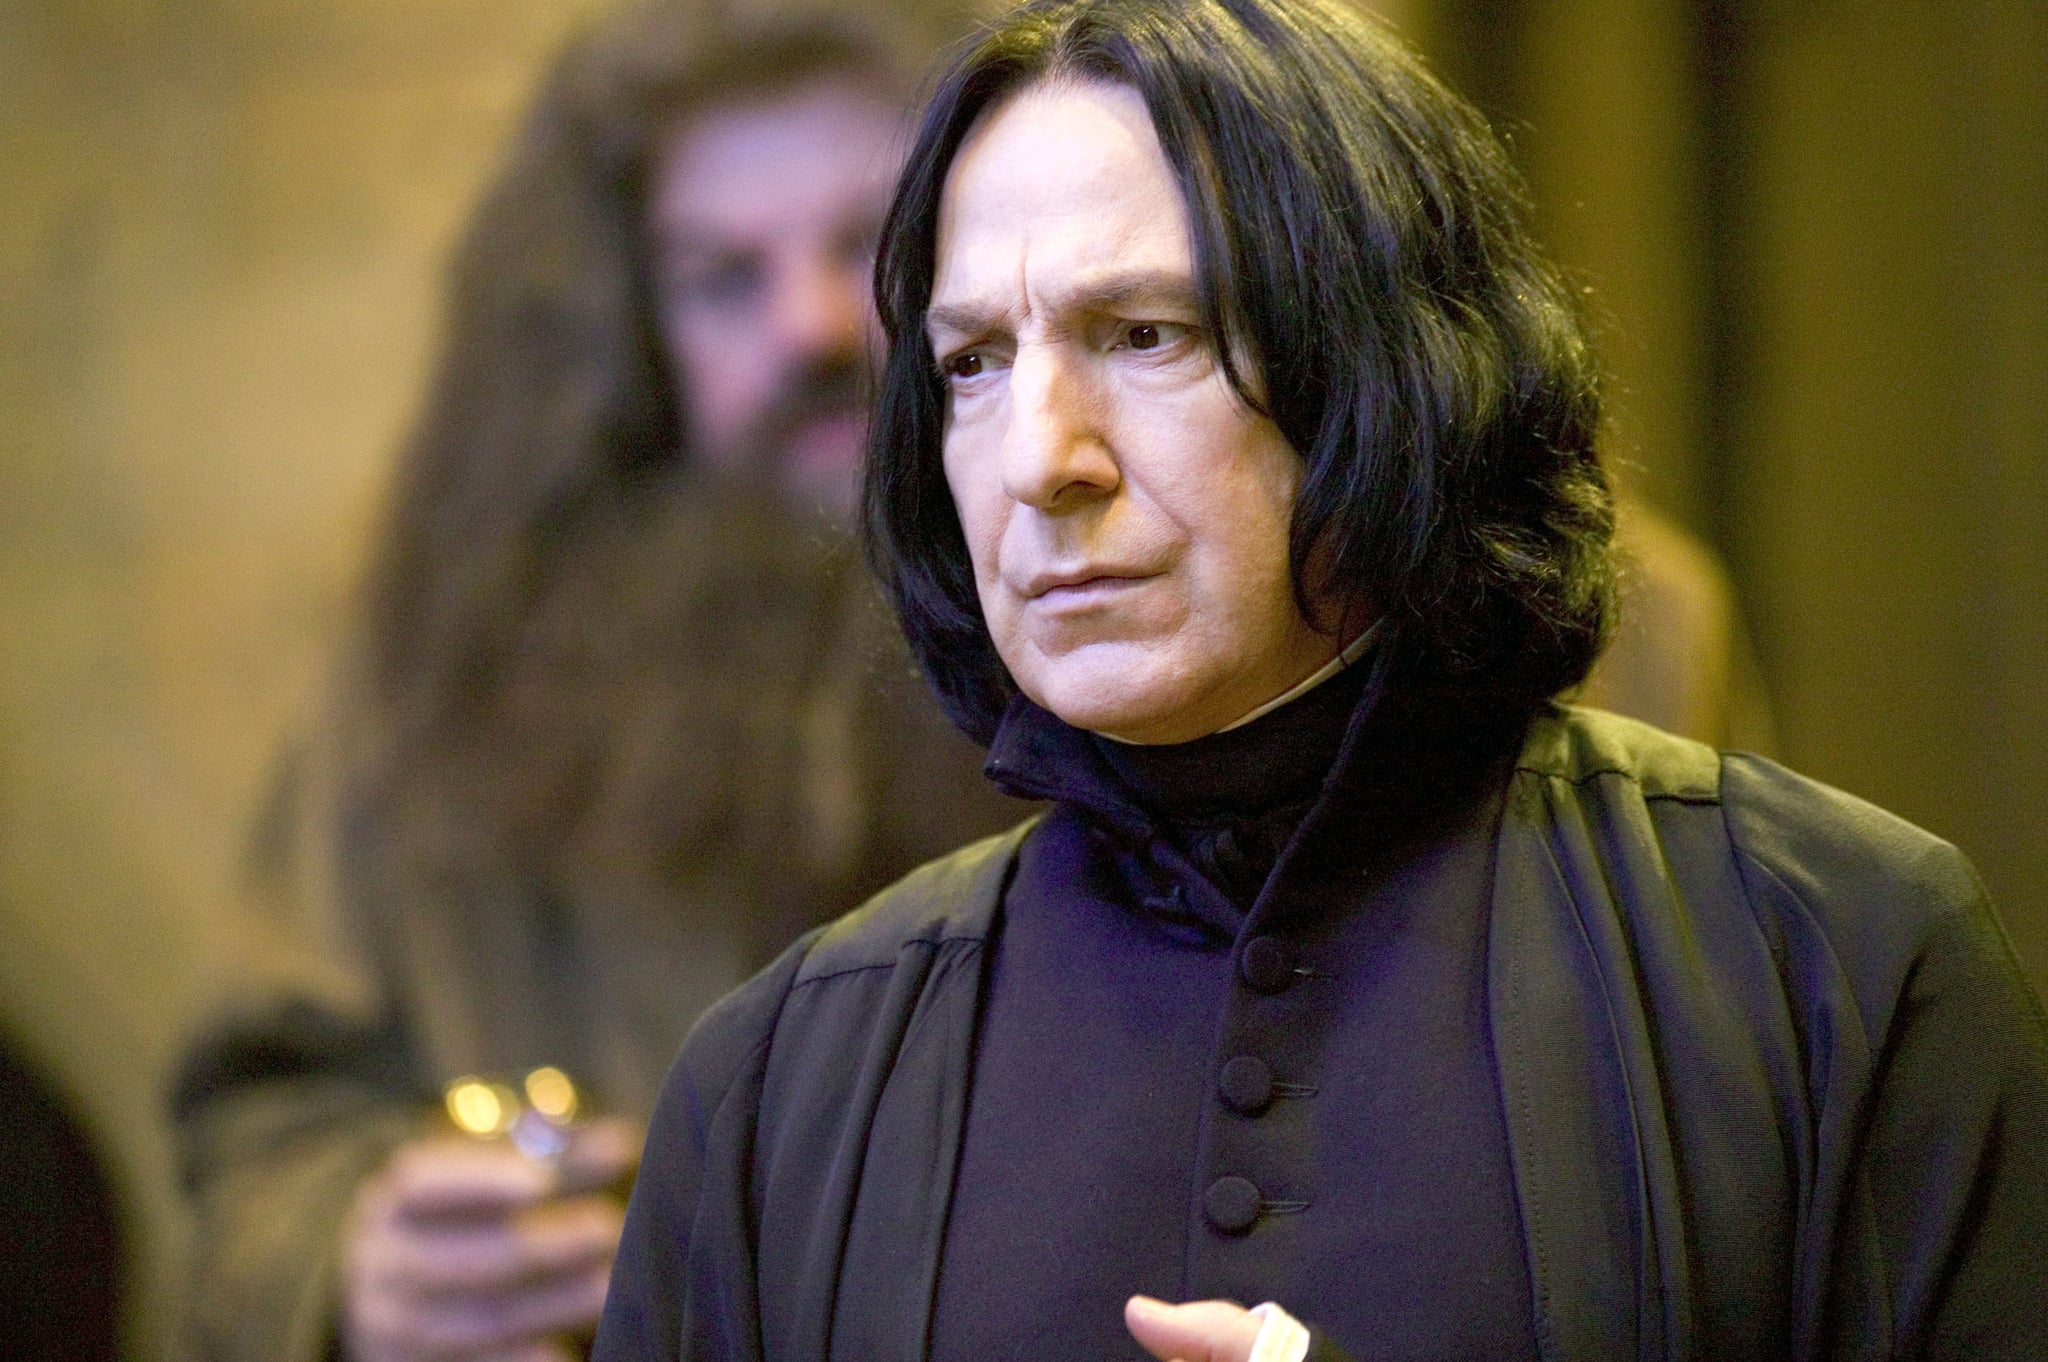 HARRY POTTER AND THE GOBLET OF FIRE, Alan Rickman, 2005, (c) Warner Brothers/courtesy Everett Collection